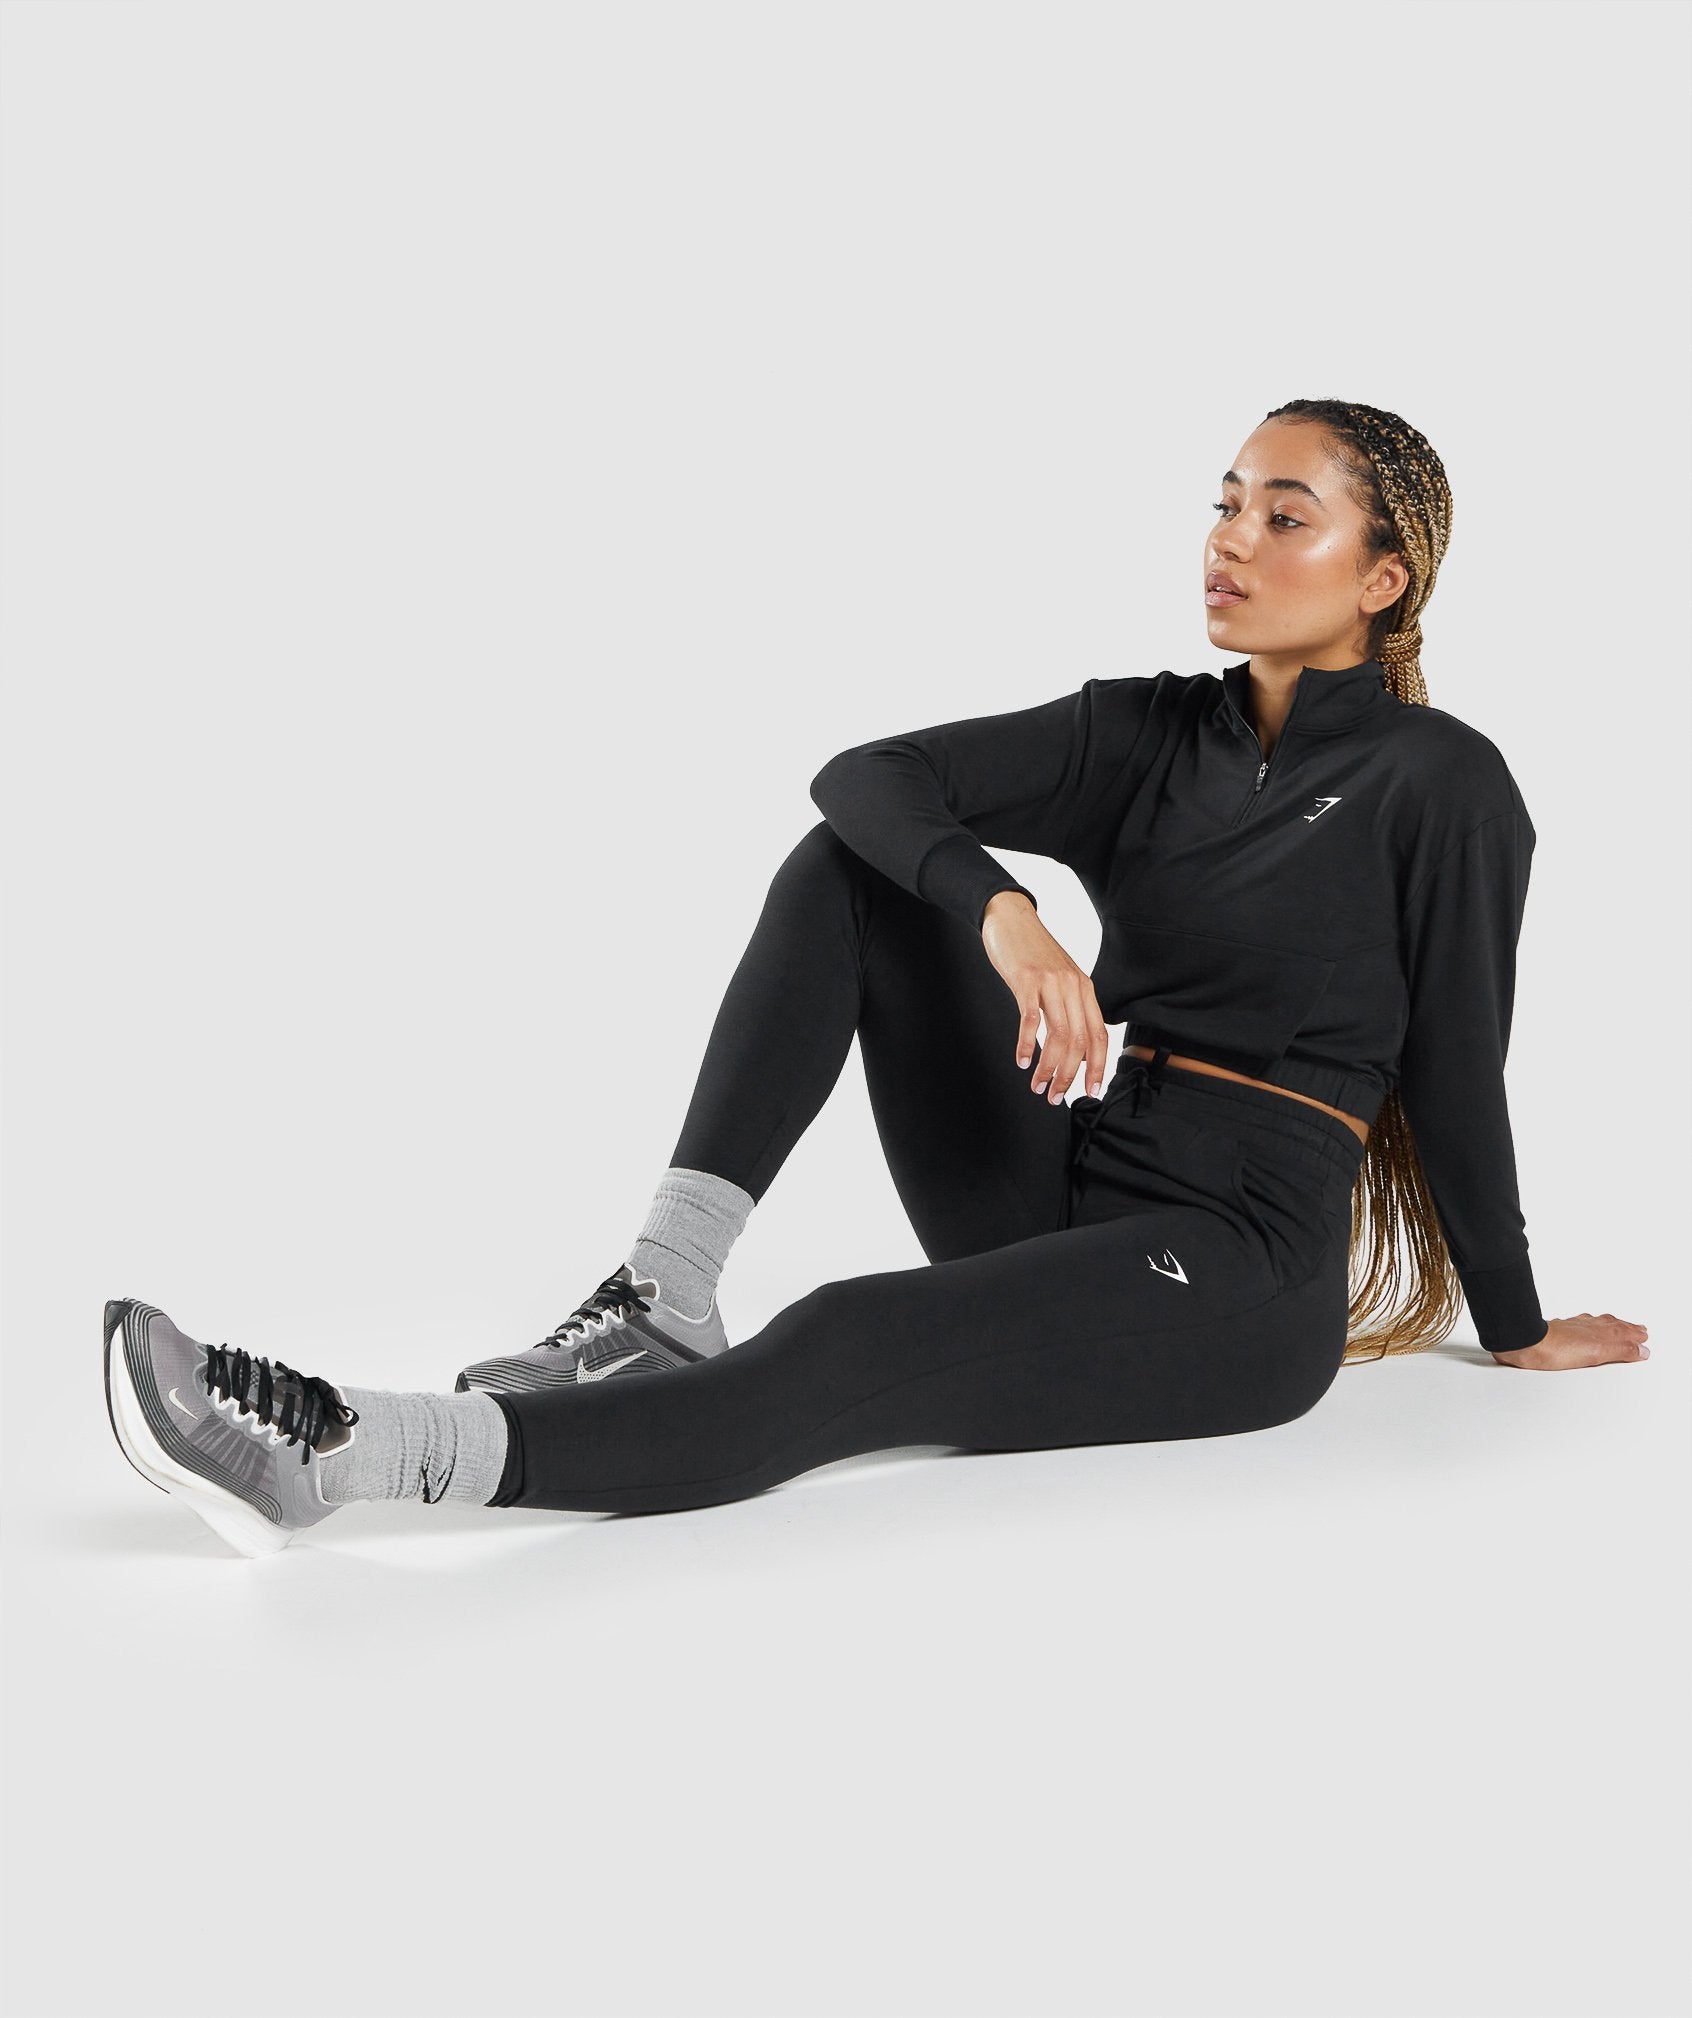 Gymshark Pippa Training Joggers Black Size XS - $34 - From Erin